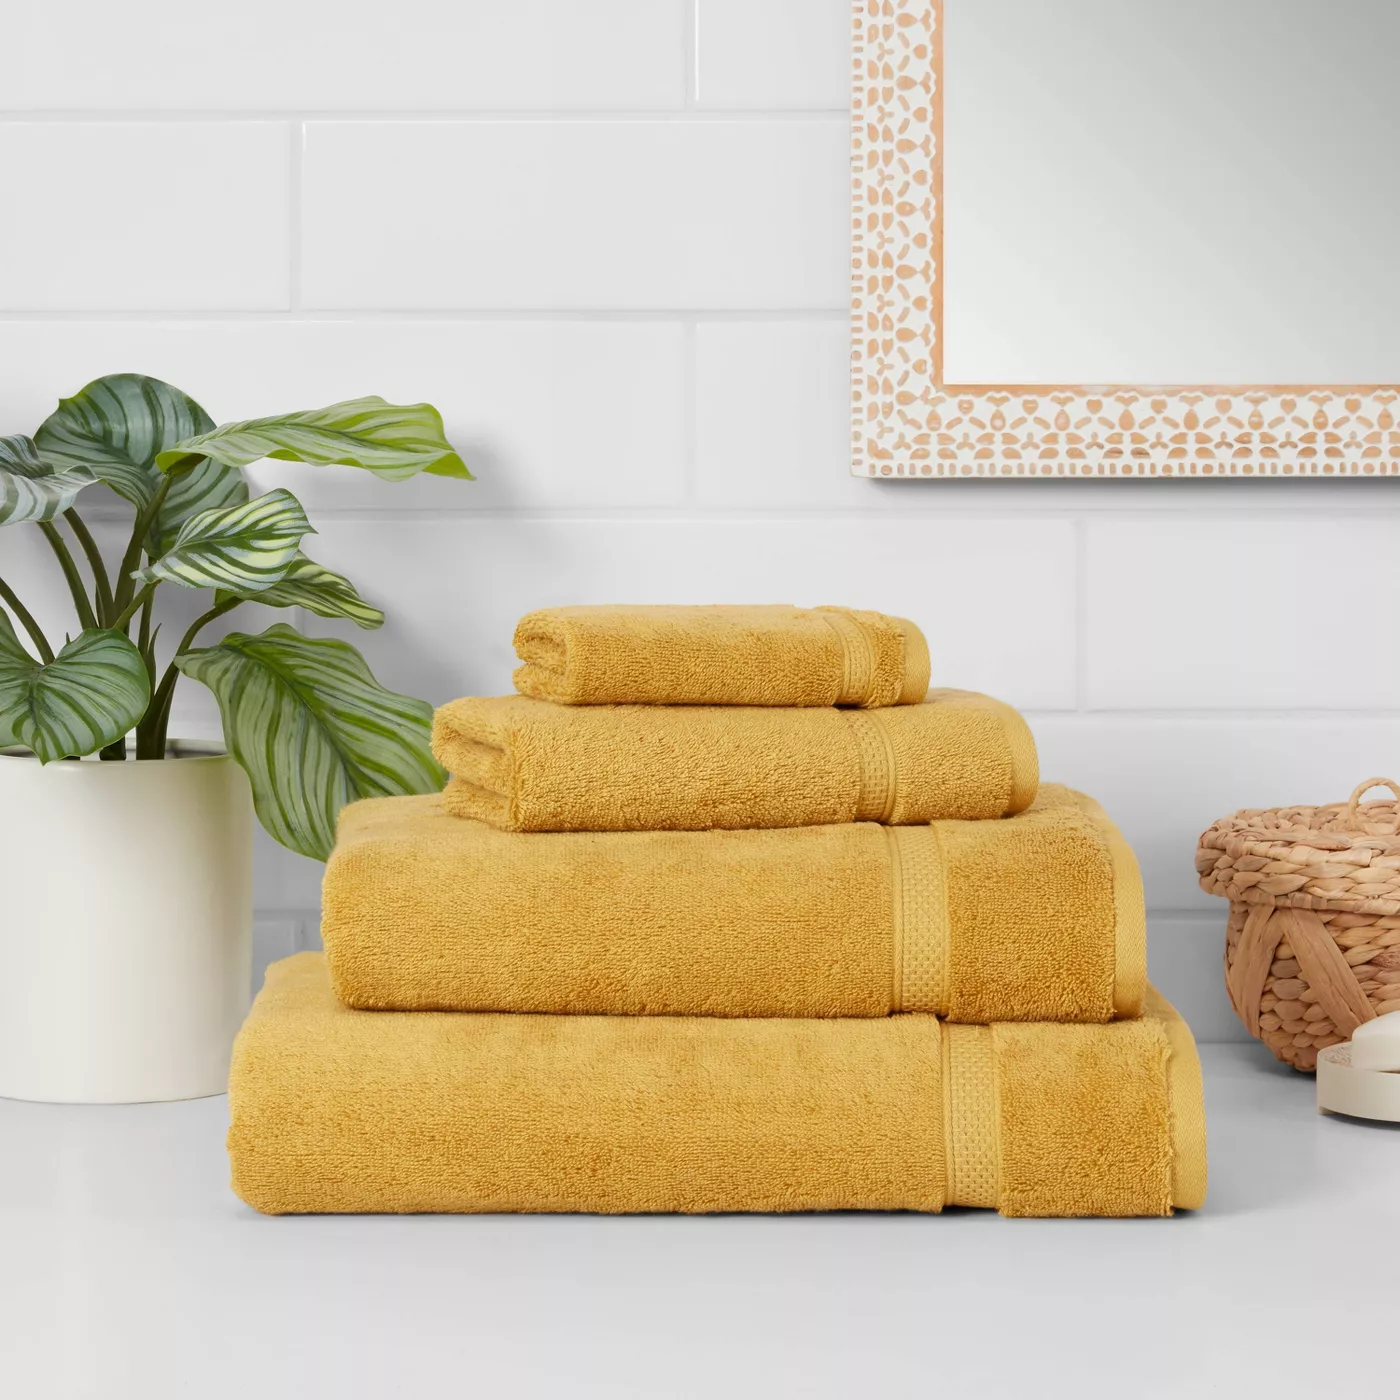 Shop Soft Solid Bath Towel - Opalhouse from Target on Openhaus